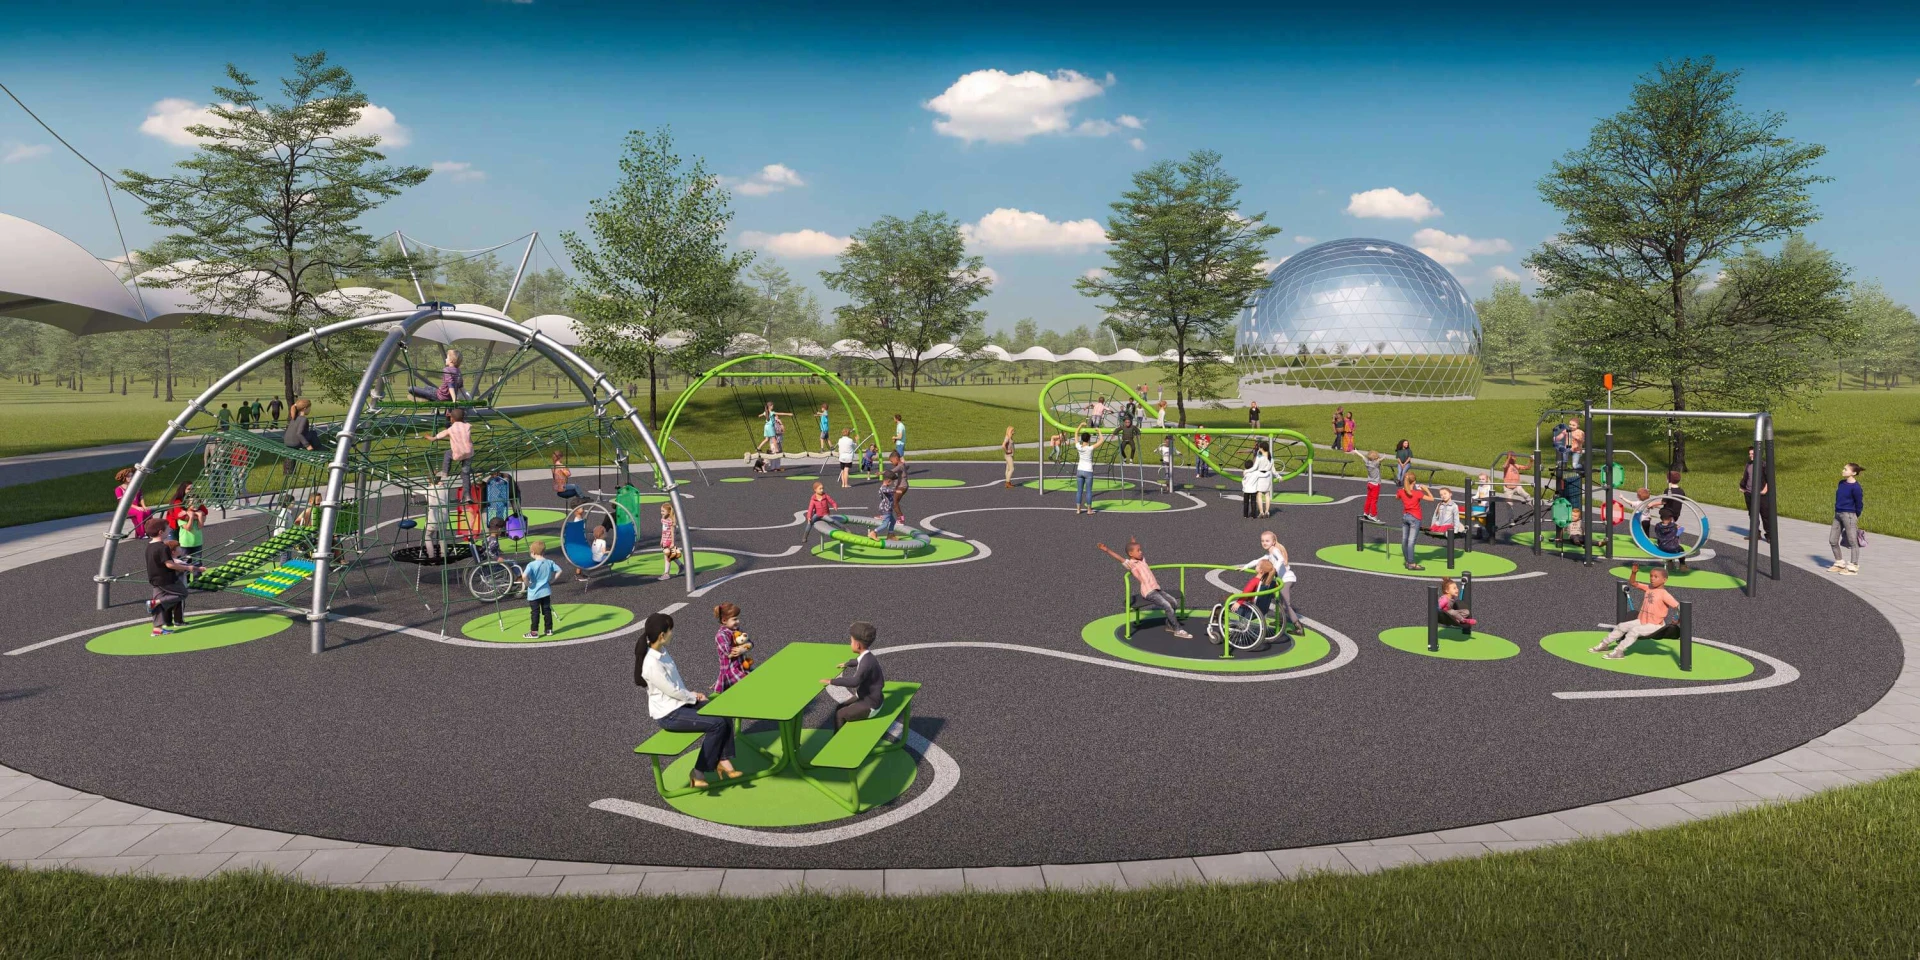 An urban arch playground design that is attracting both children and their parents